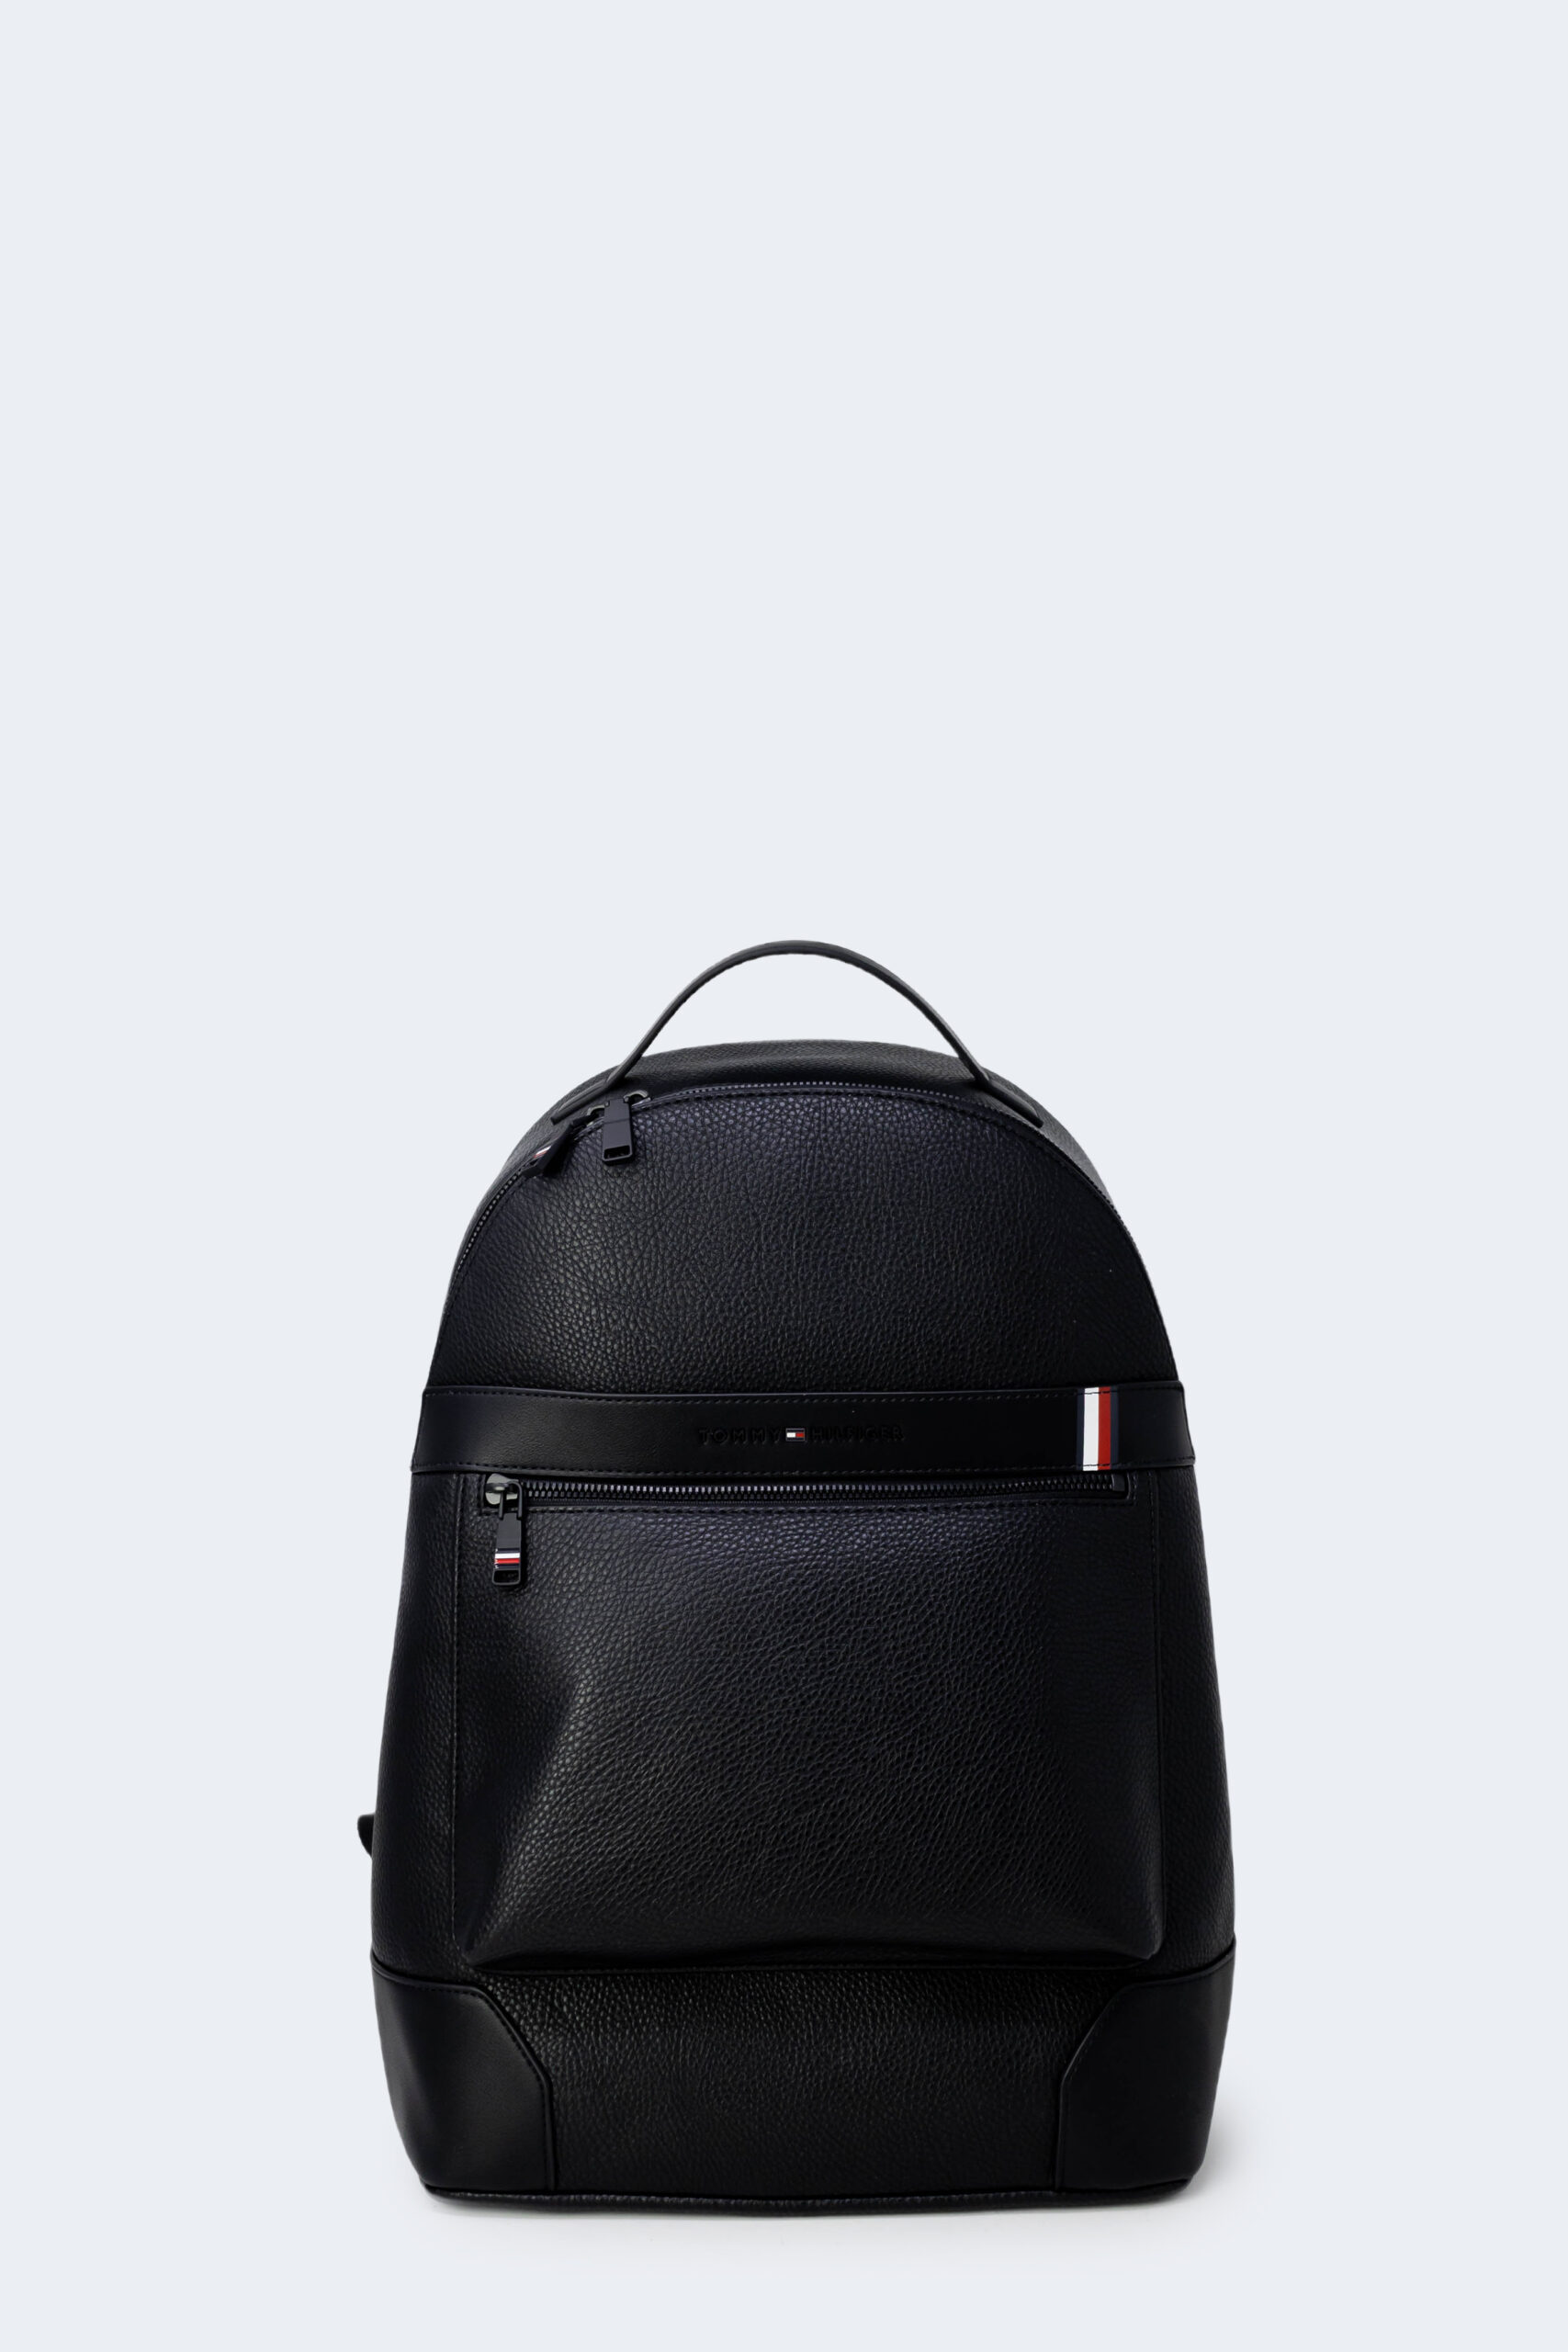 Zaino Tommy Hilfiger TH CENTRAL BACKPACK Nero – 90697